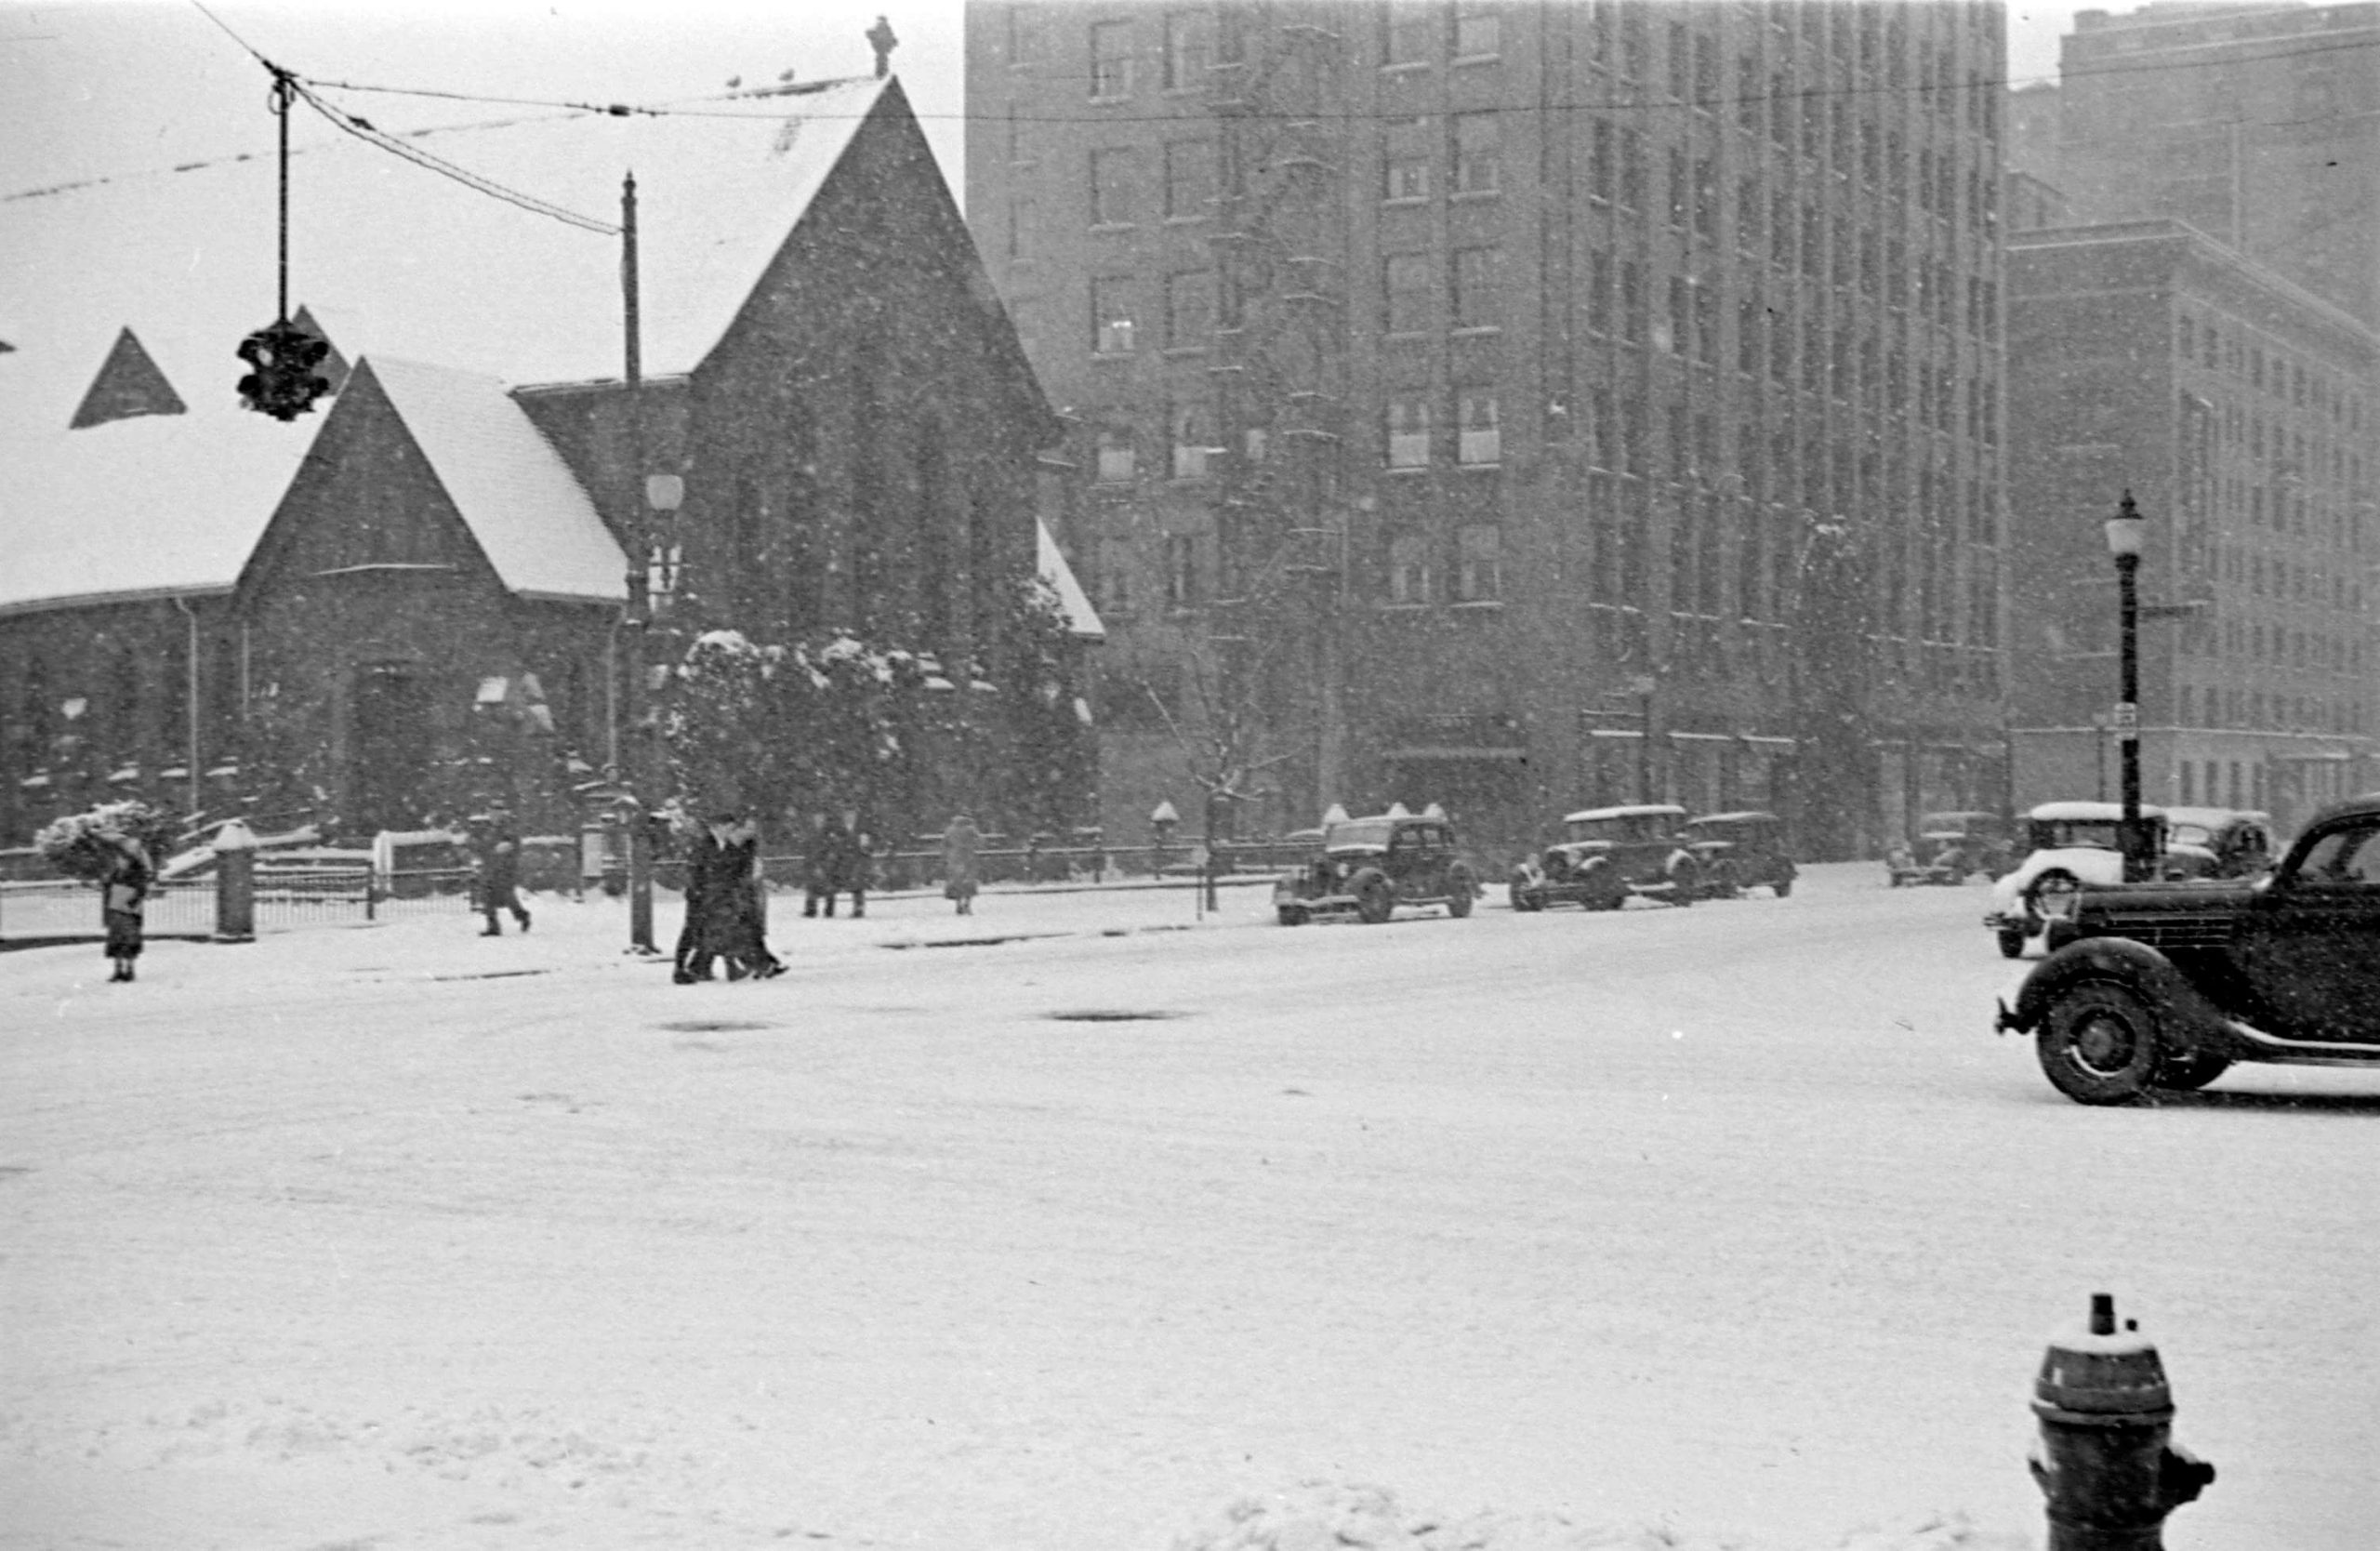 1937 - The corner of Georgia Street and Burrard Street in a snow storm